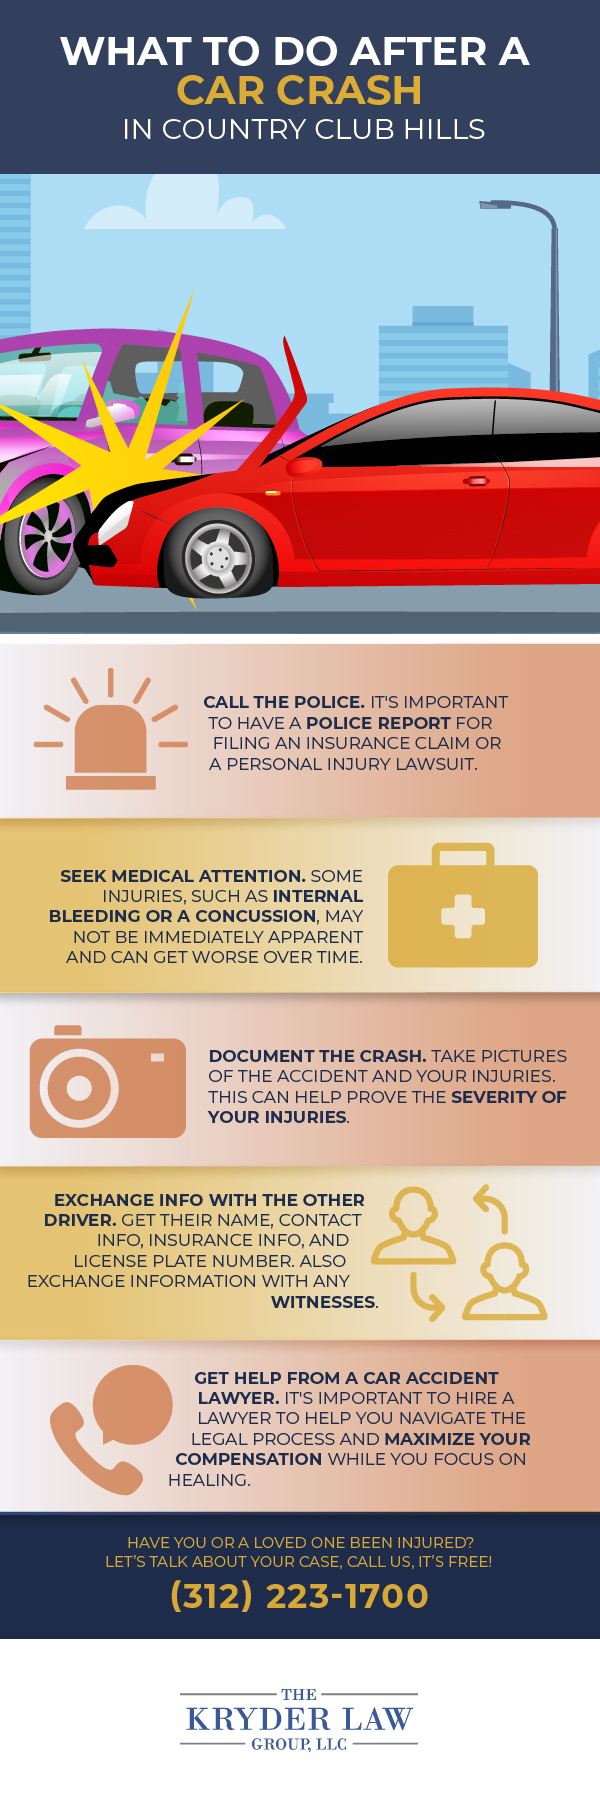 What to Do After a Car Crash in Country Club Hills Infographic